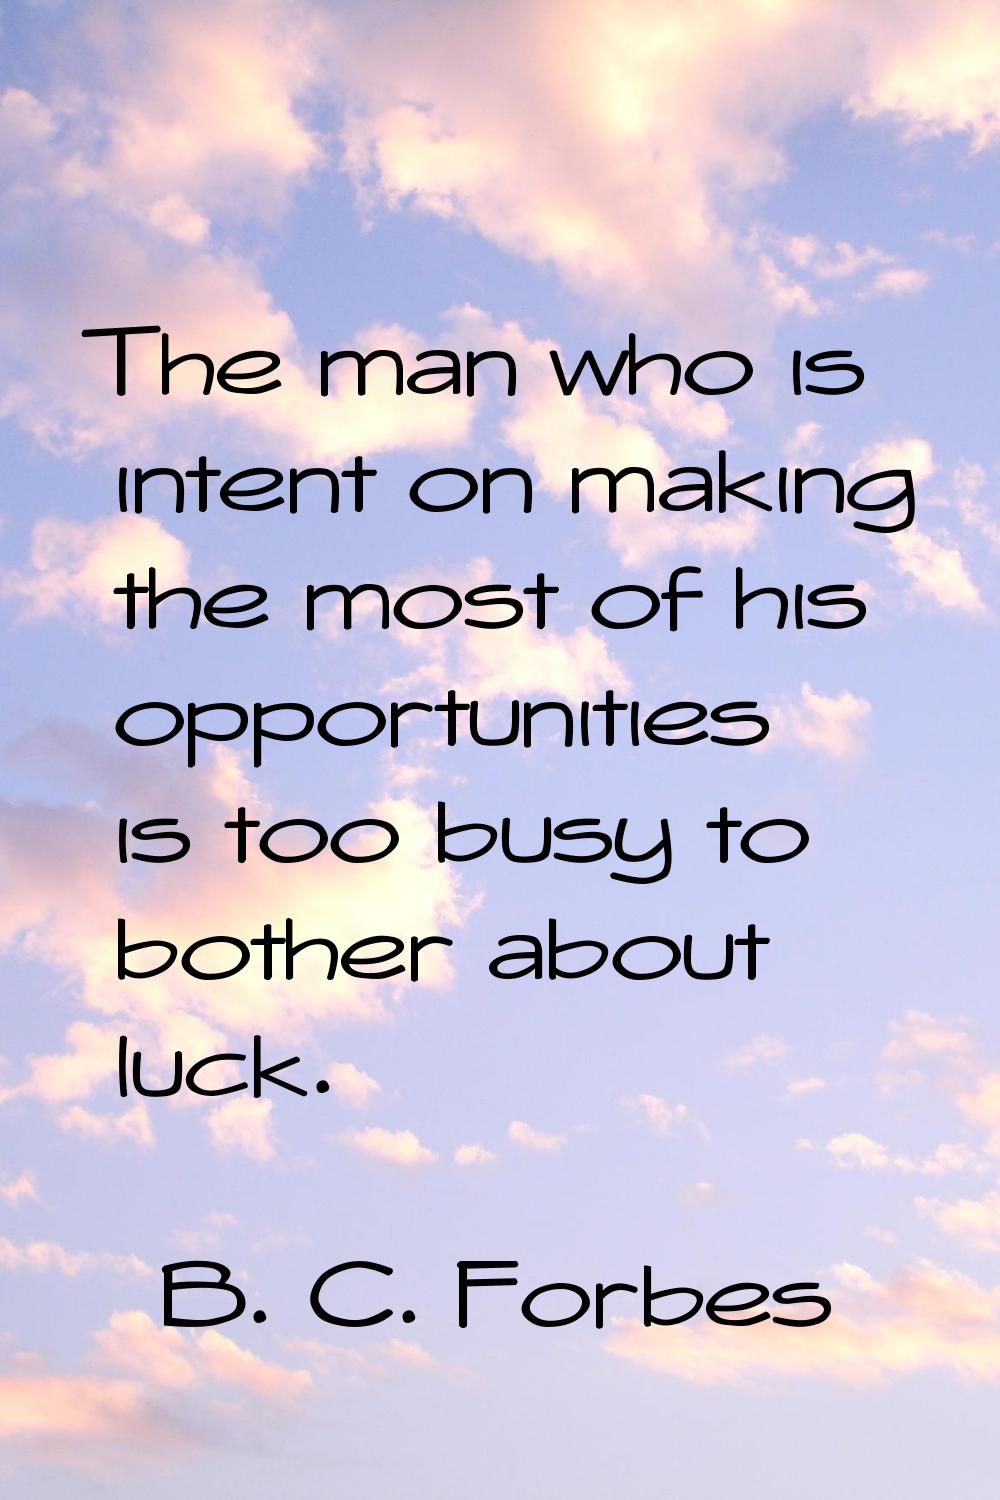 The man who is intent on making the most of his opportunities is too busy to bother about luck.